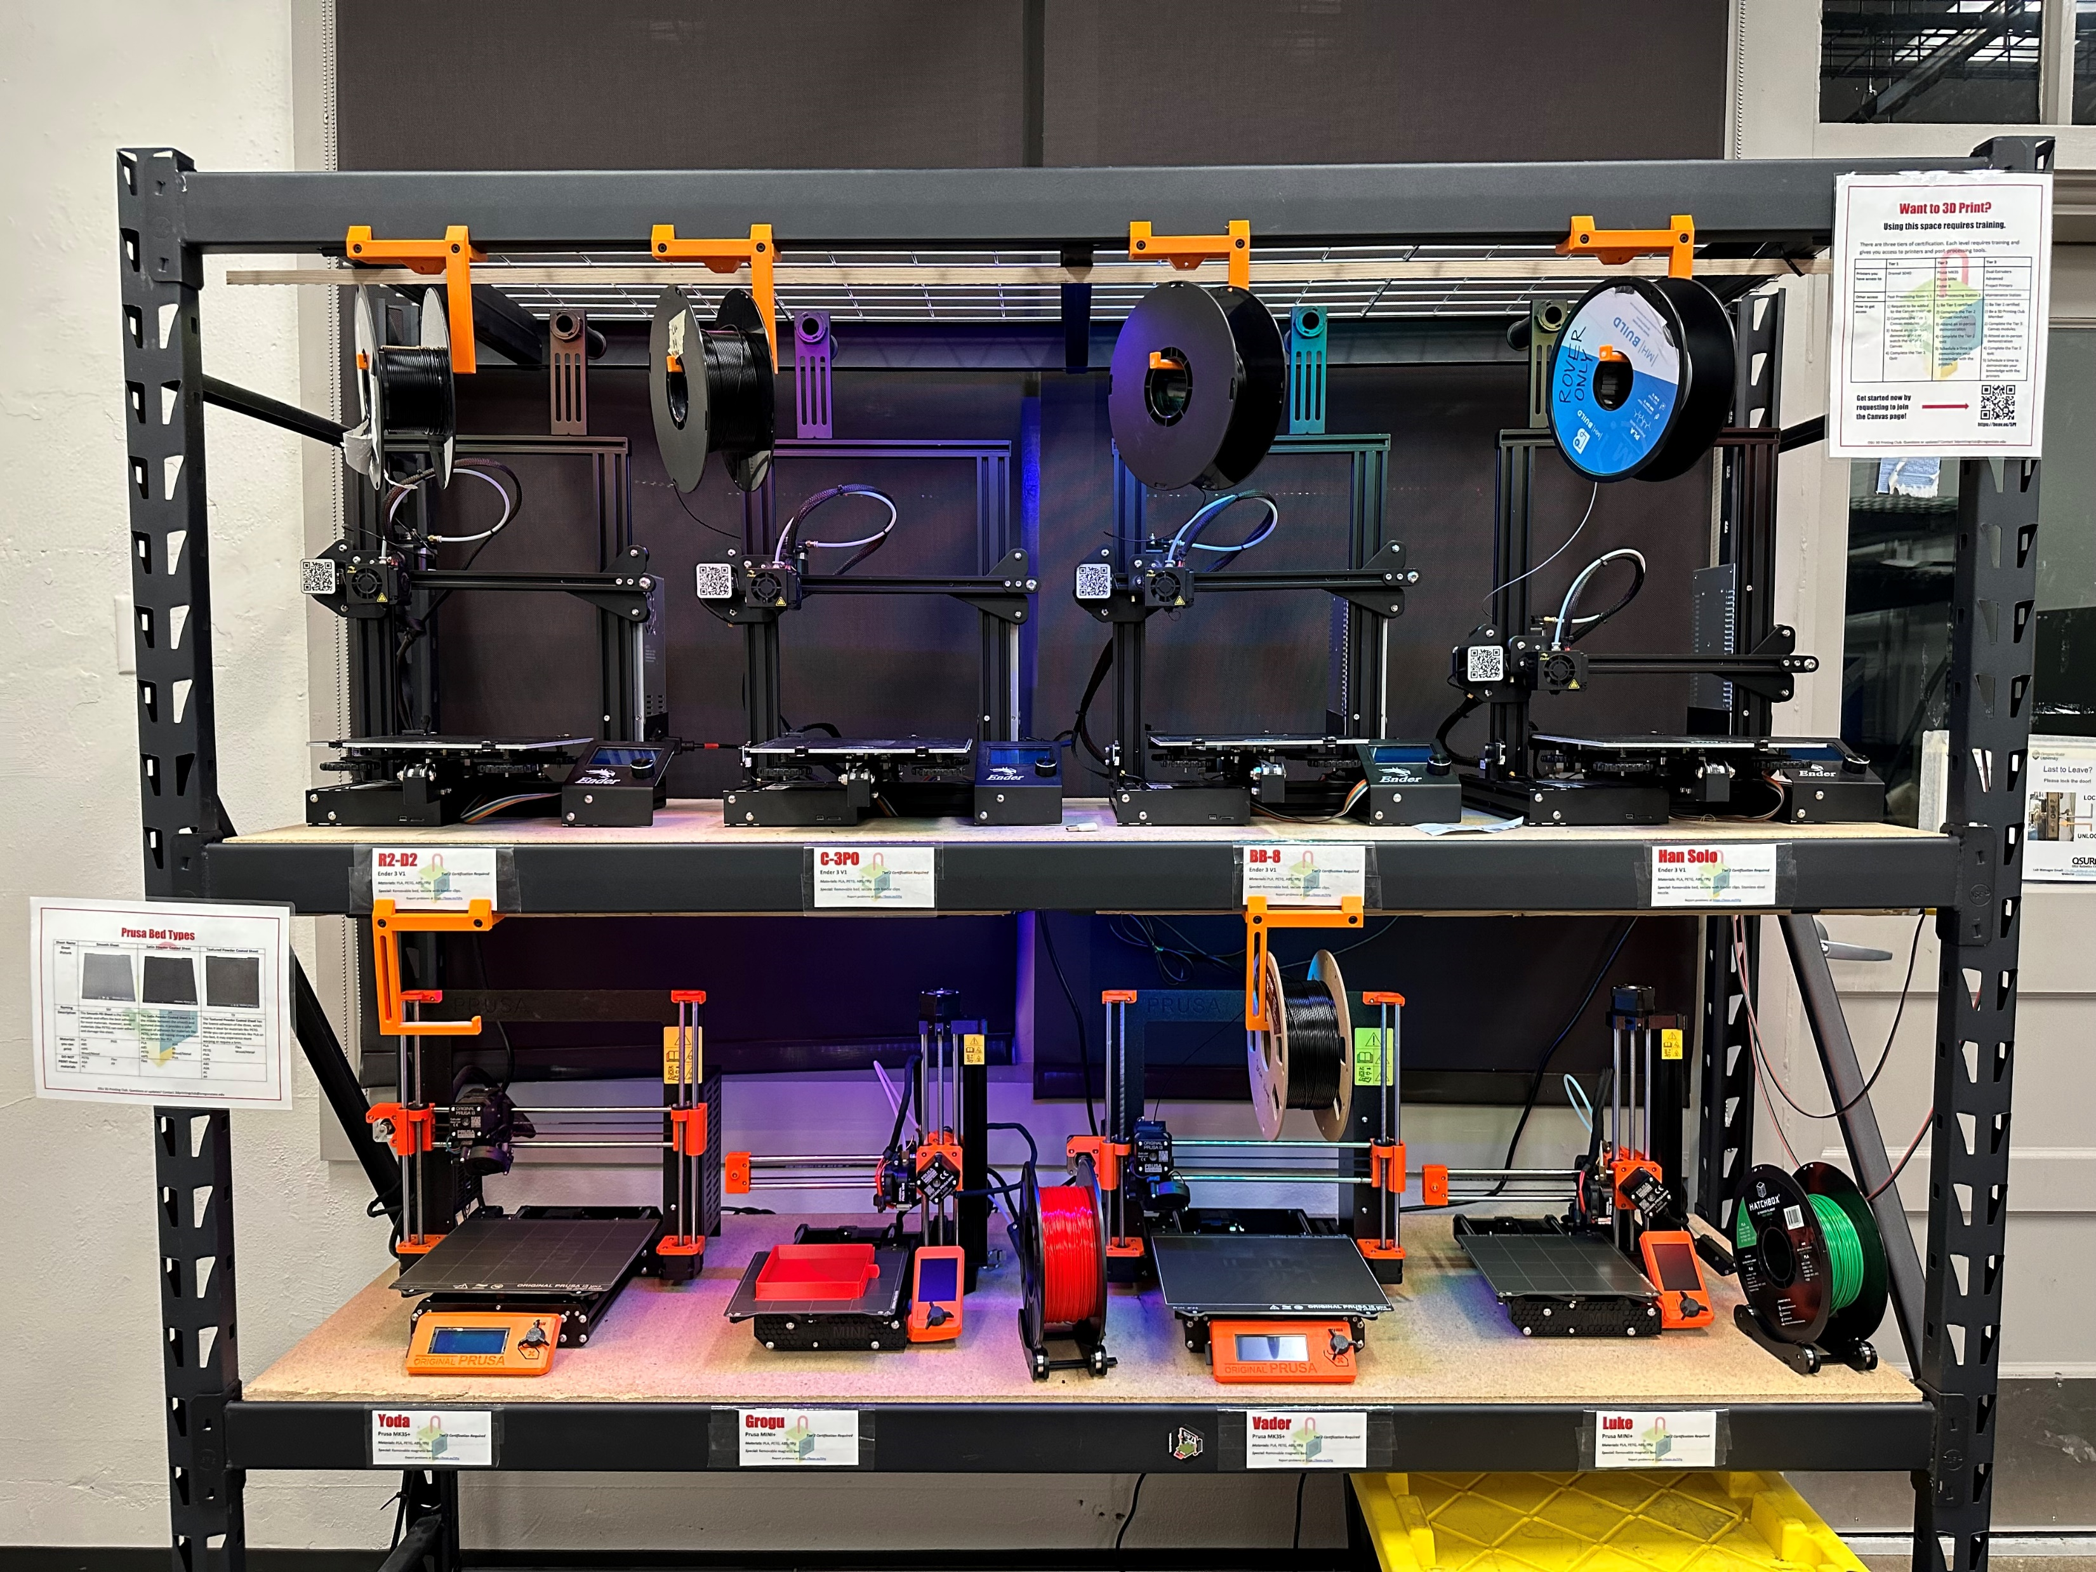 The Tier 2 shelf with Prusa and Ender printers.